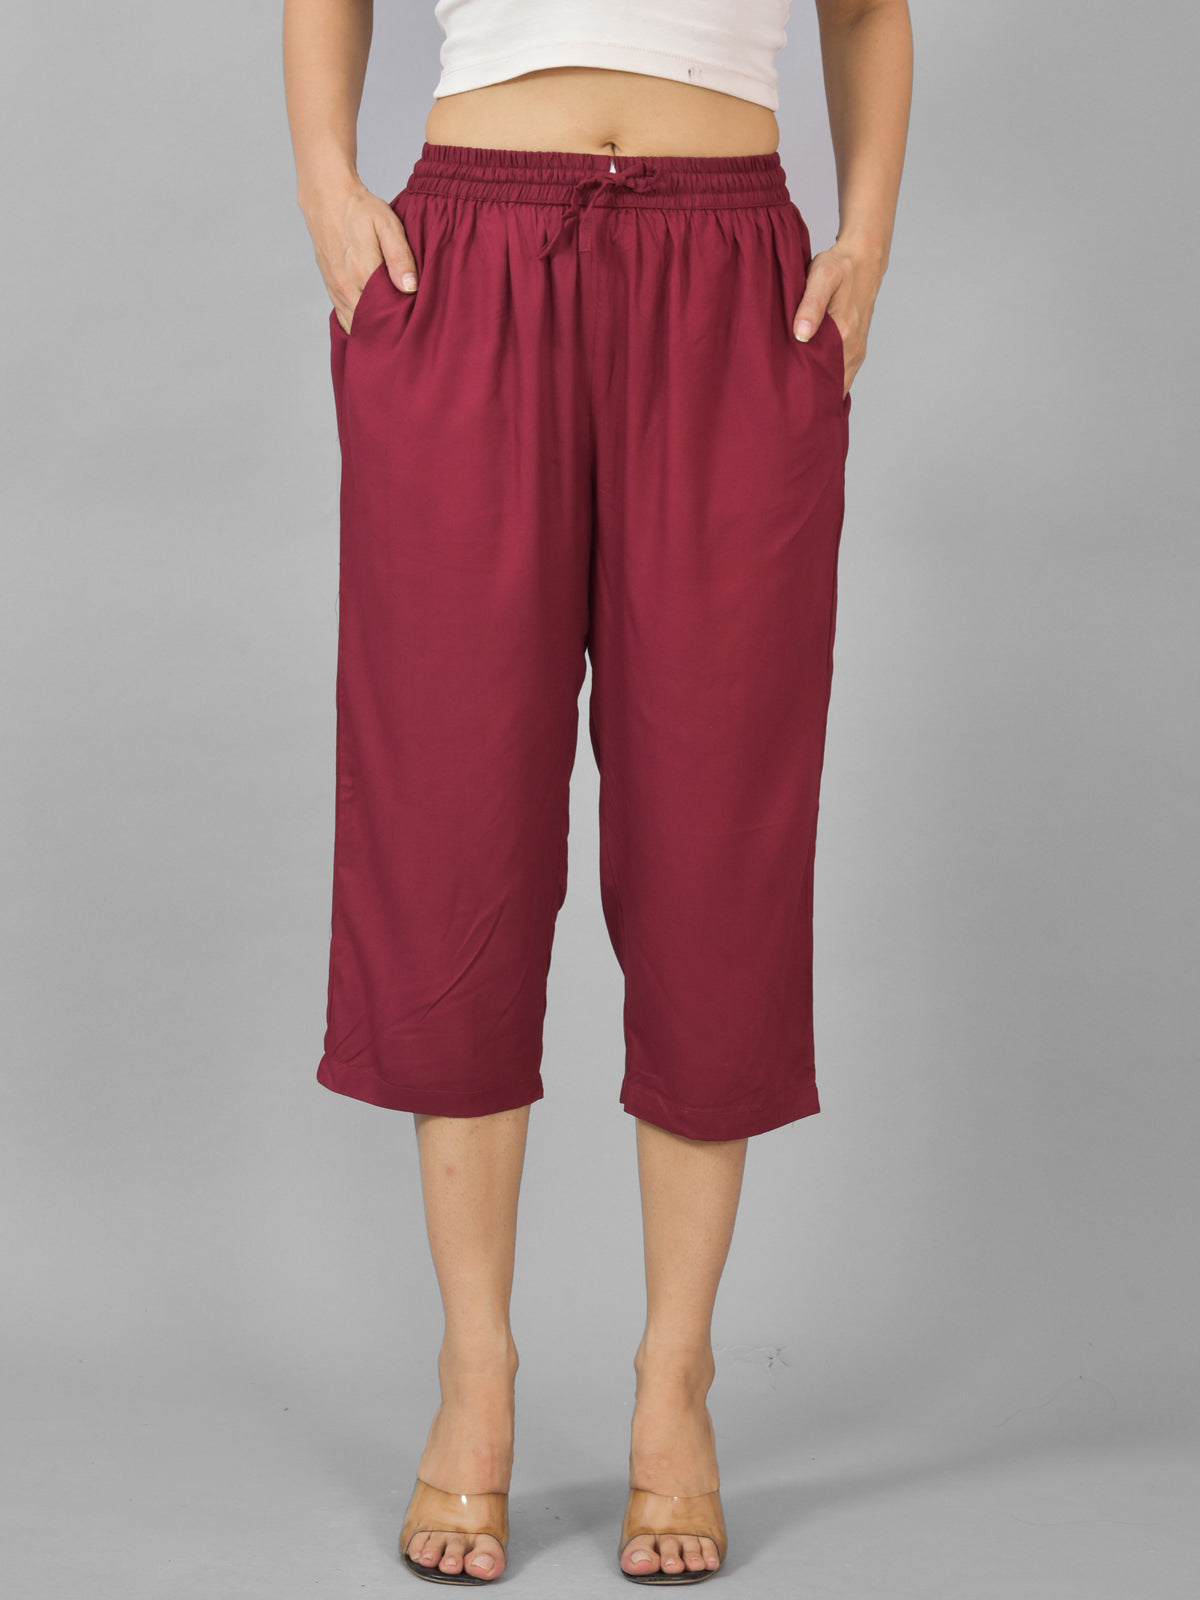 Pack Of 2 Women Rani Pink And Wine Calf Length Rayon Culottes Trouser Combo